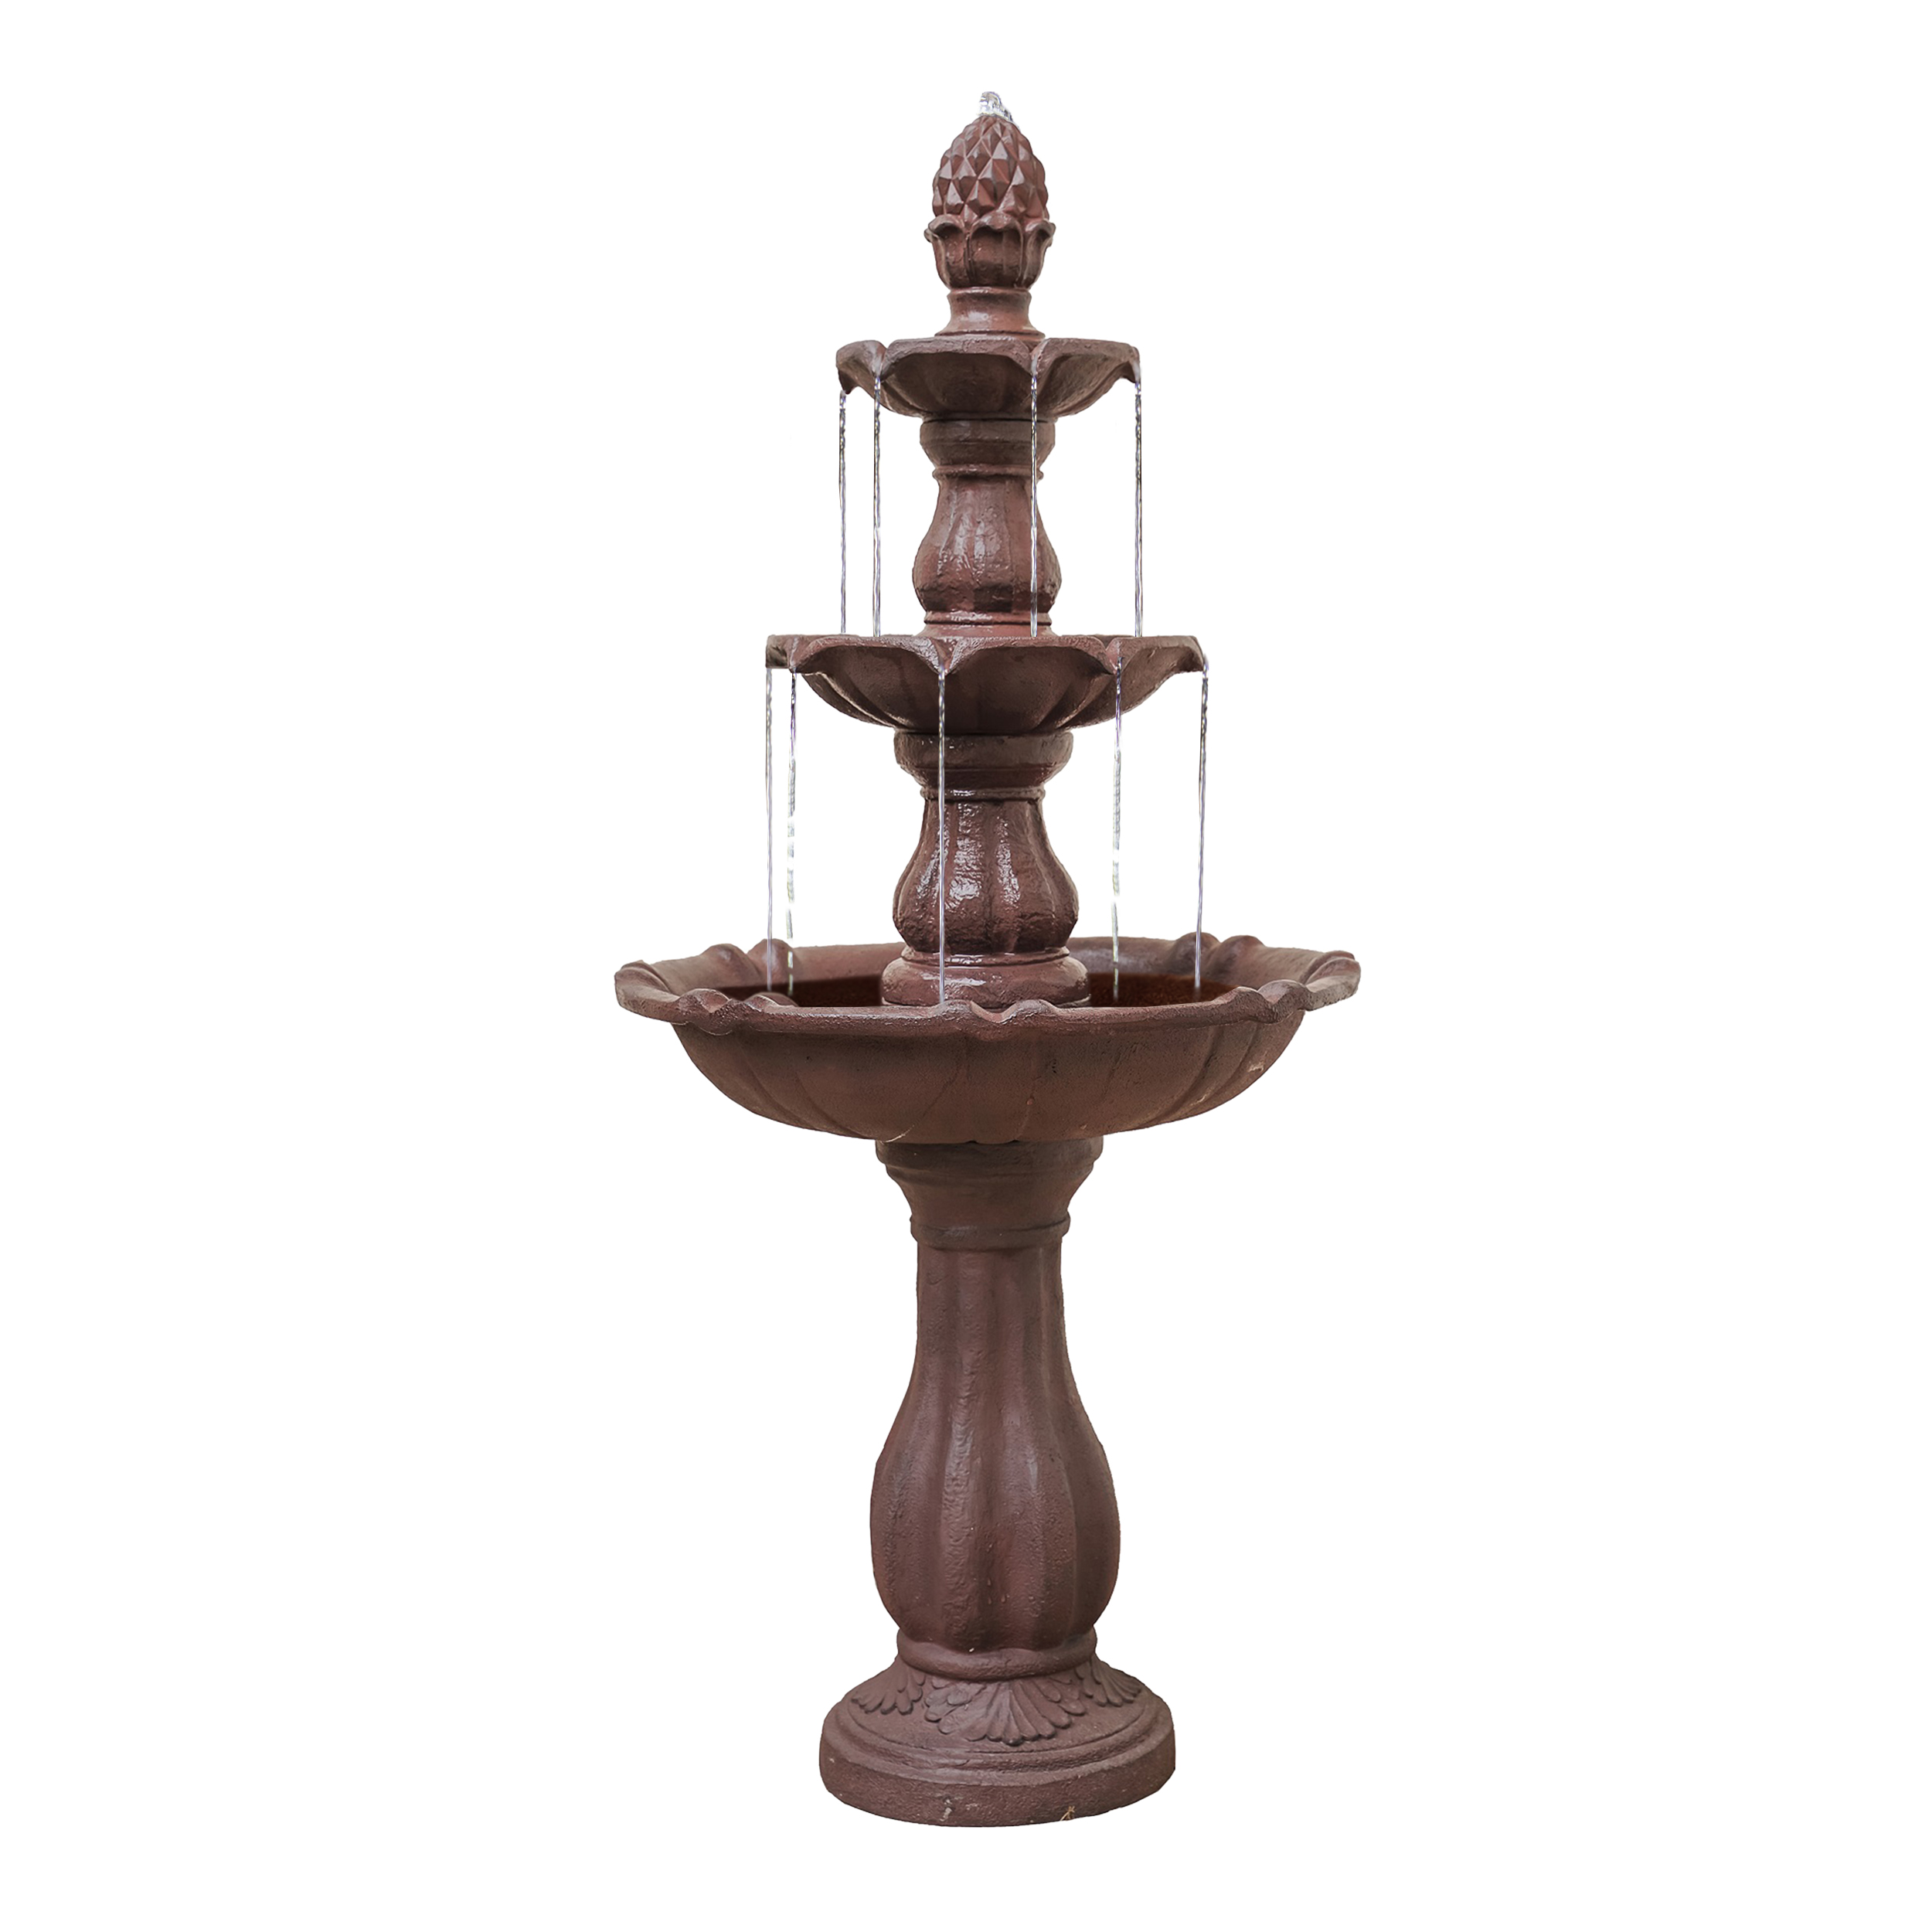 This cascading waterfall fountain is perfect for indoor/outdoor décor and adds a touch of elegance to any space. Shop now for the ultimate garden fountain experience.